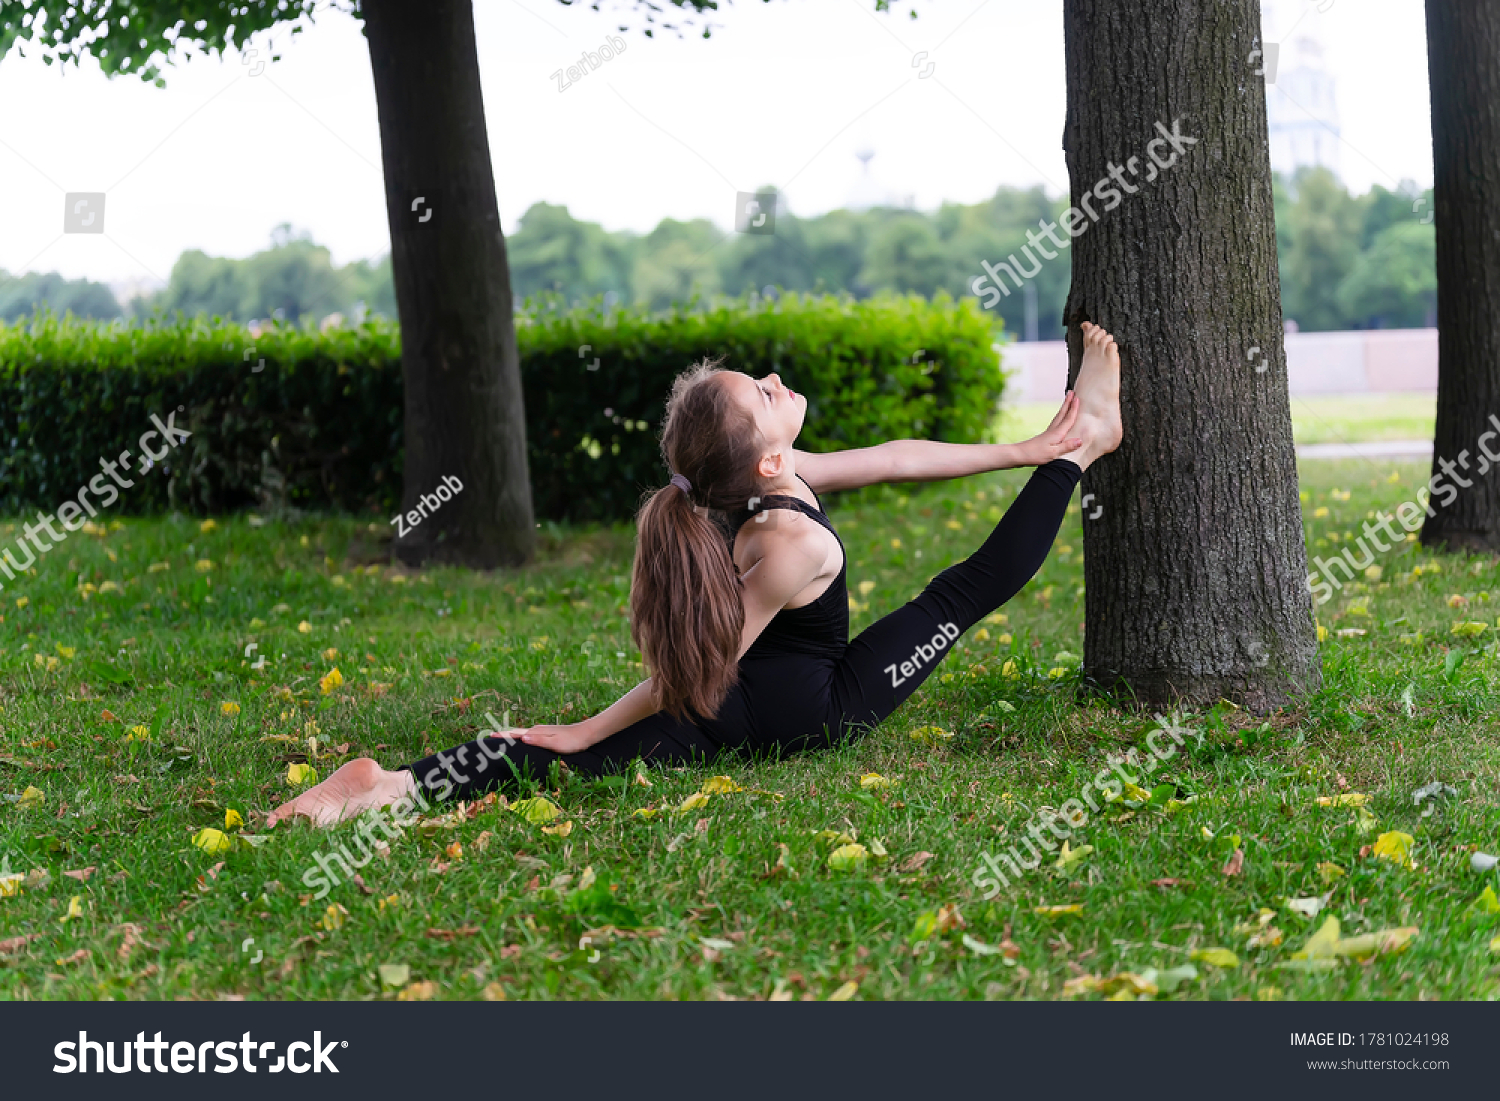 Girl Gymnast Performs Her Exercises Park Stock Photo 1781024198 ...